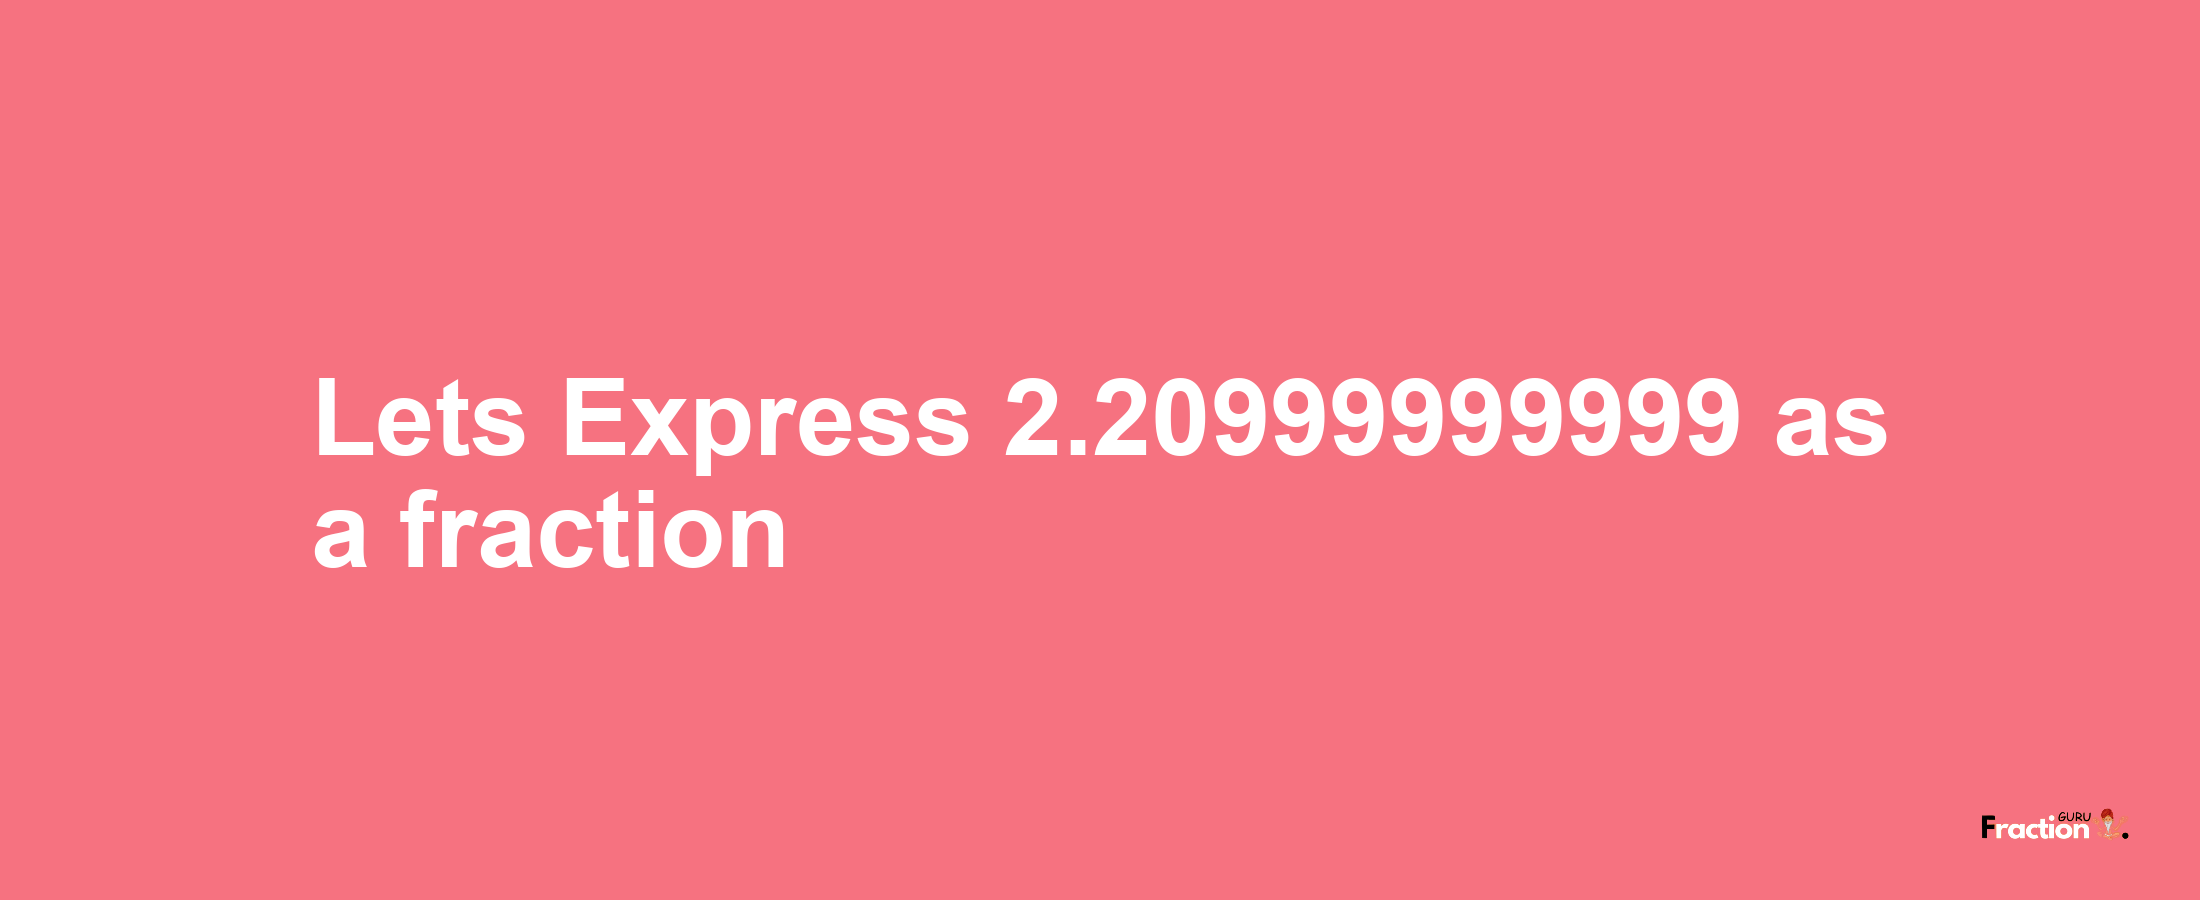 Lets Express 2.20999999999 as afraction